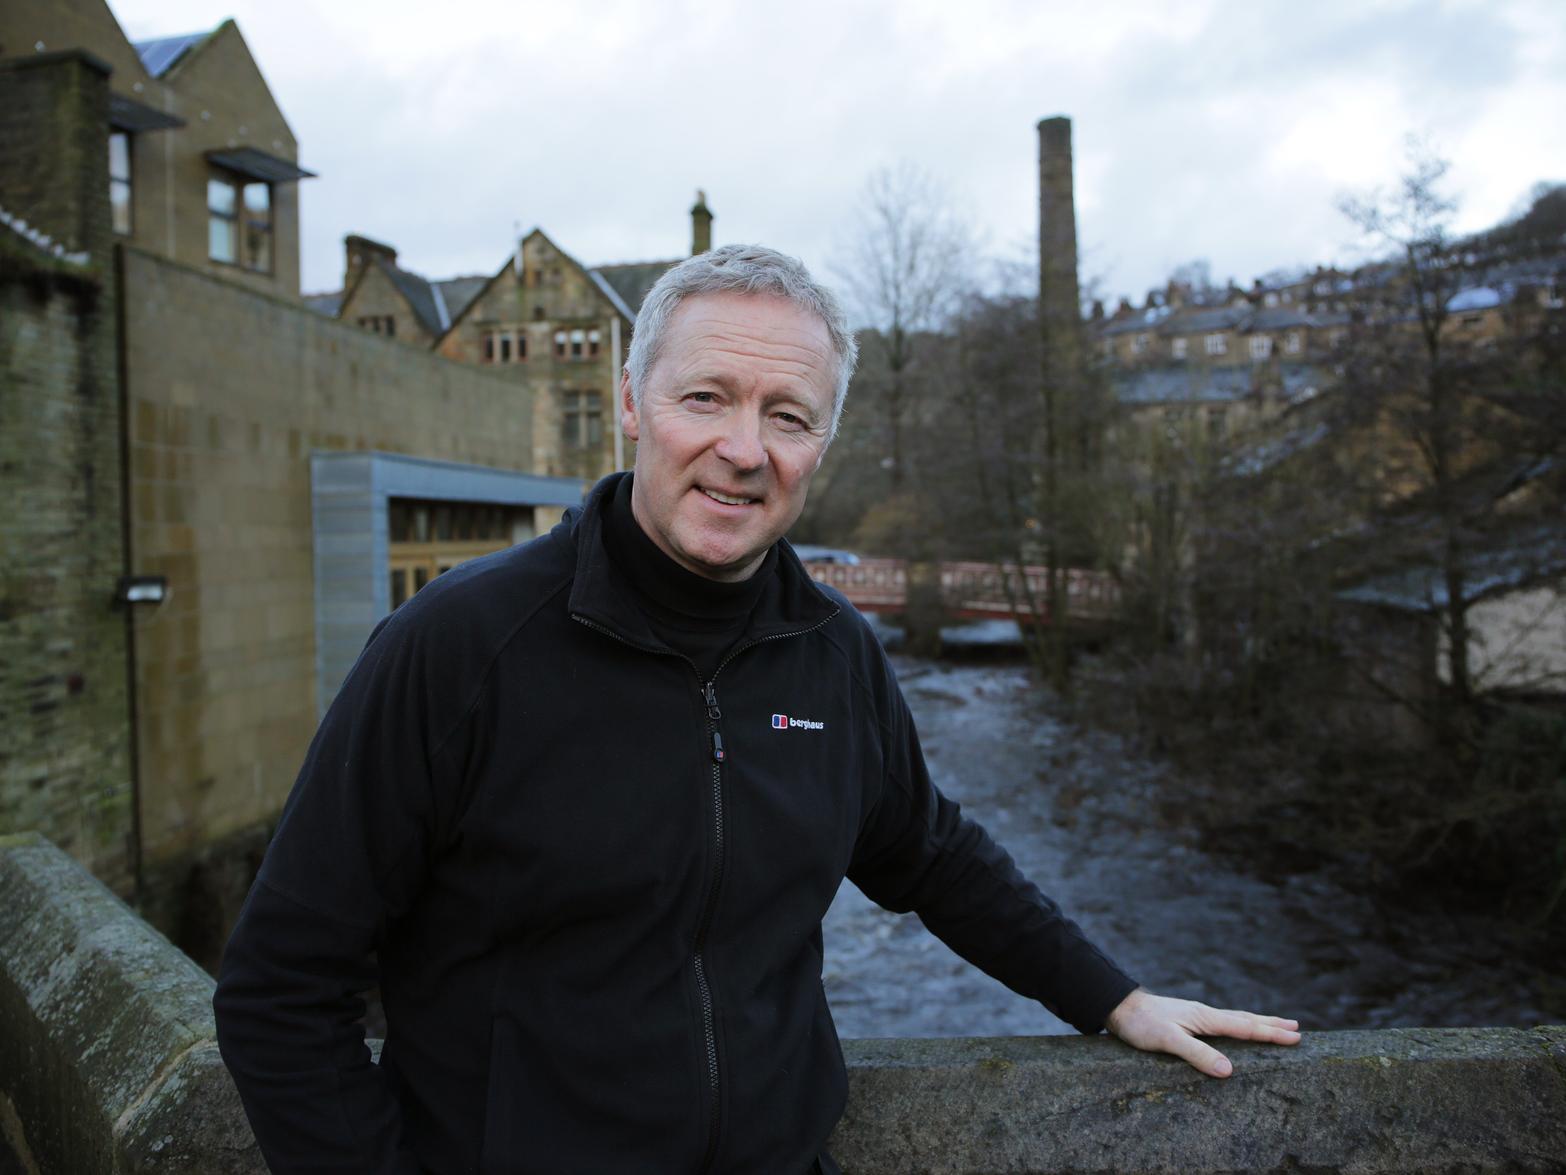 Back in 2016, impressionist Rory Bremner headed up a group of comedians at a gig to raise money for for those affected by the Boxing Day floods in the Calder Valley.